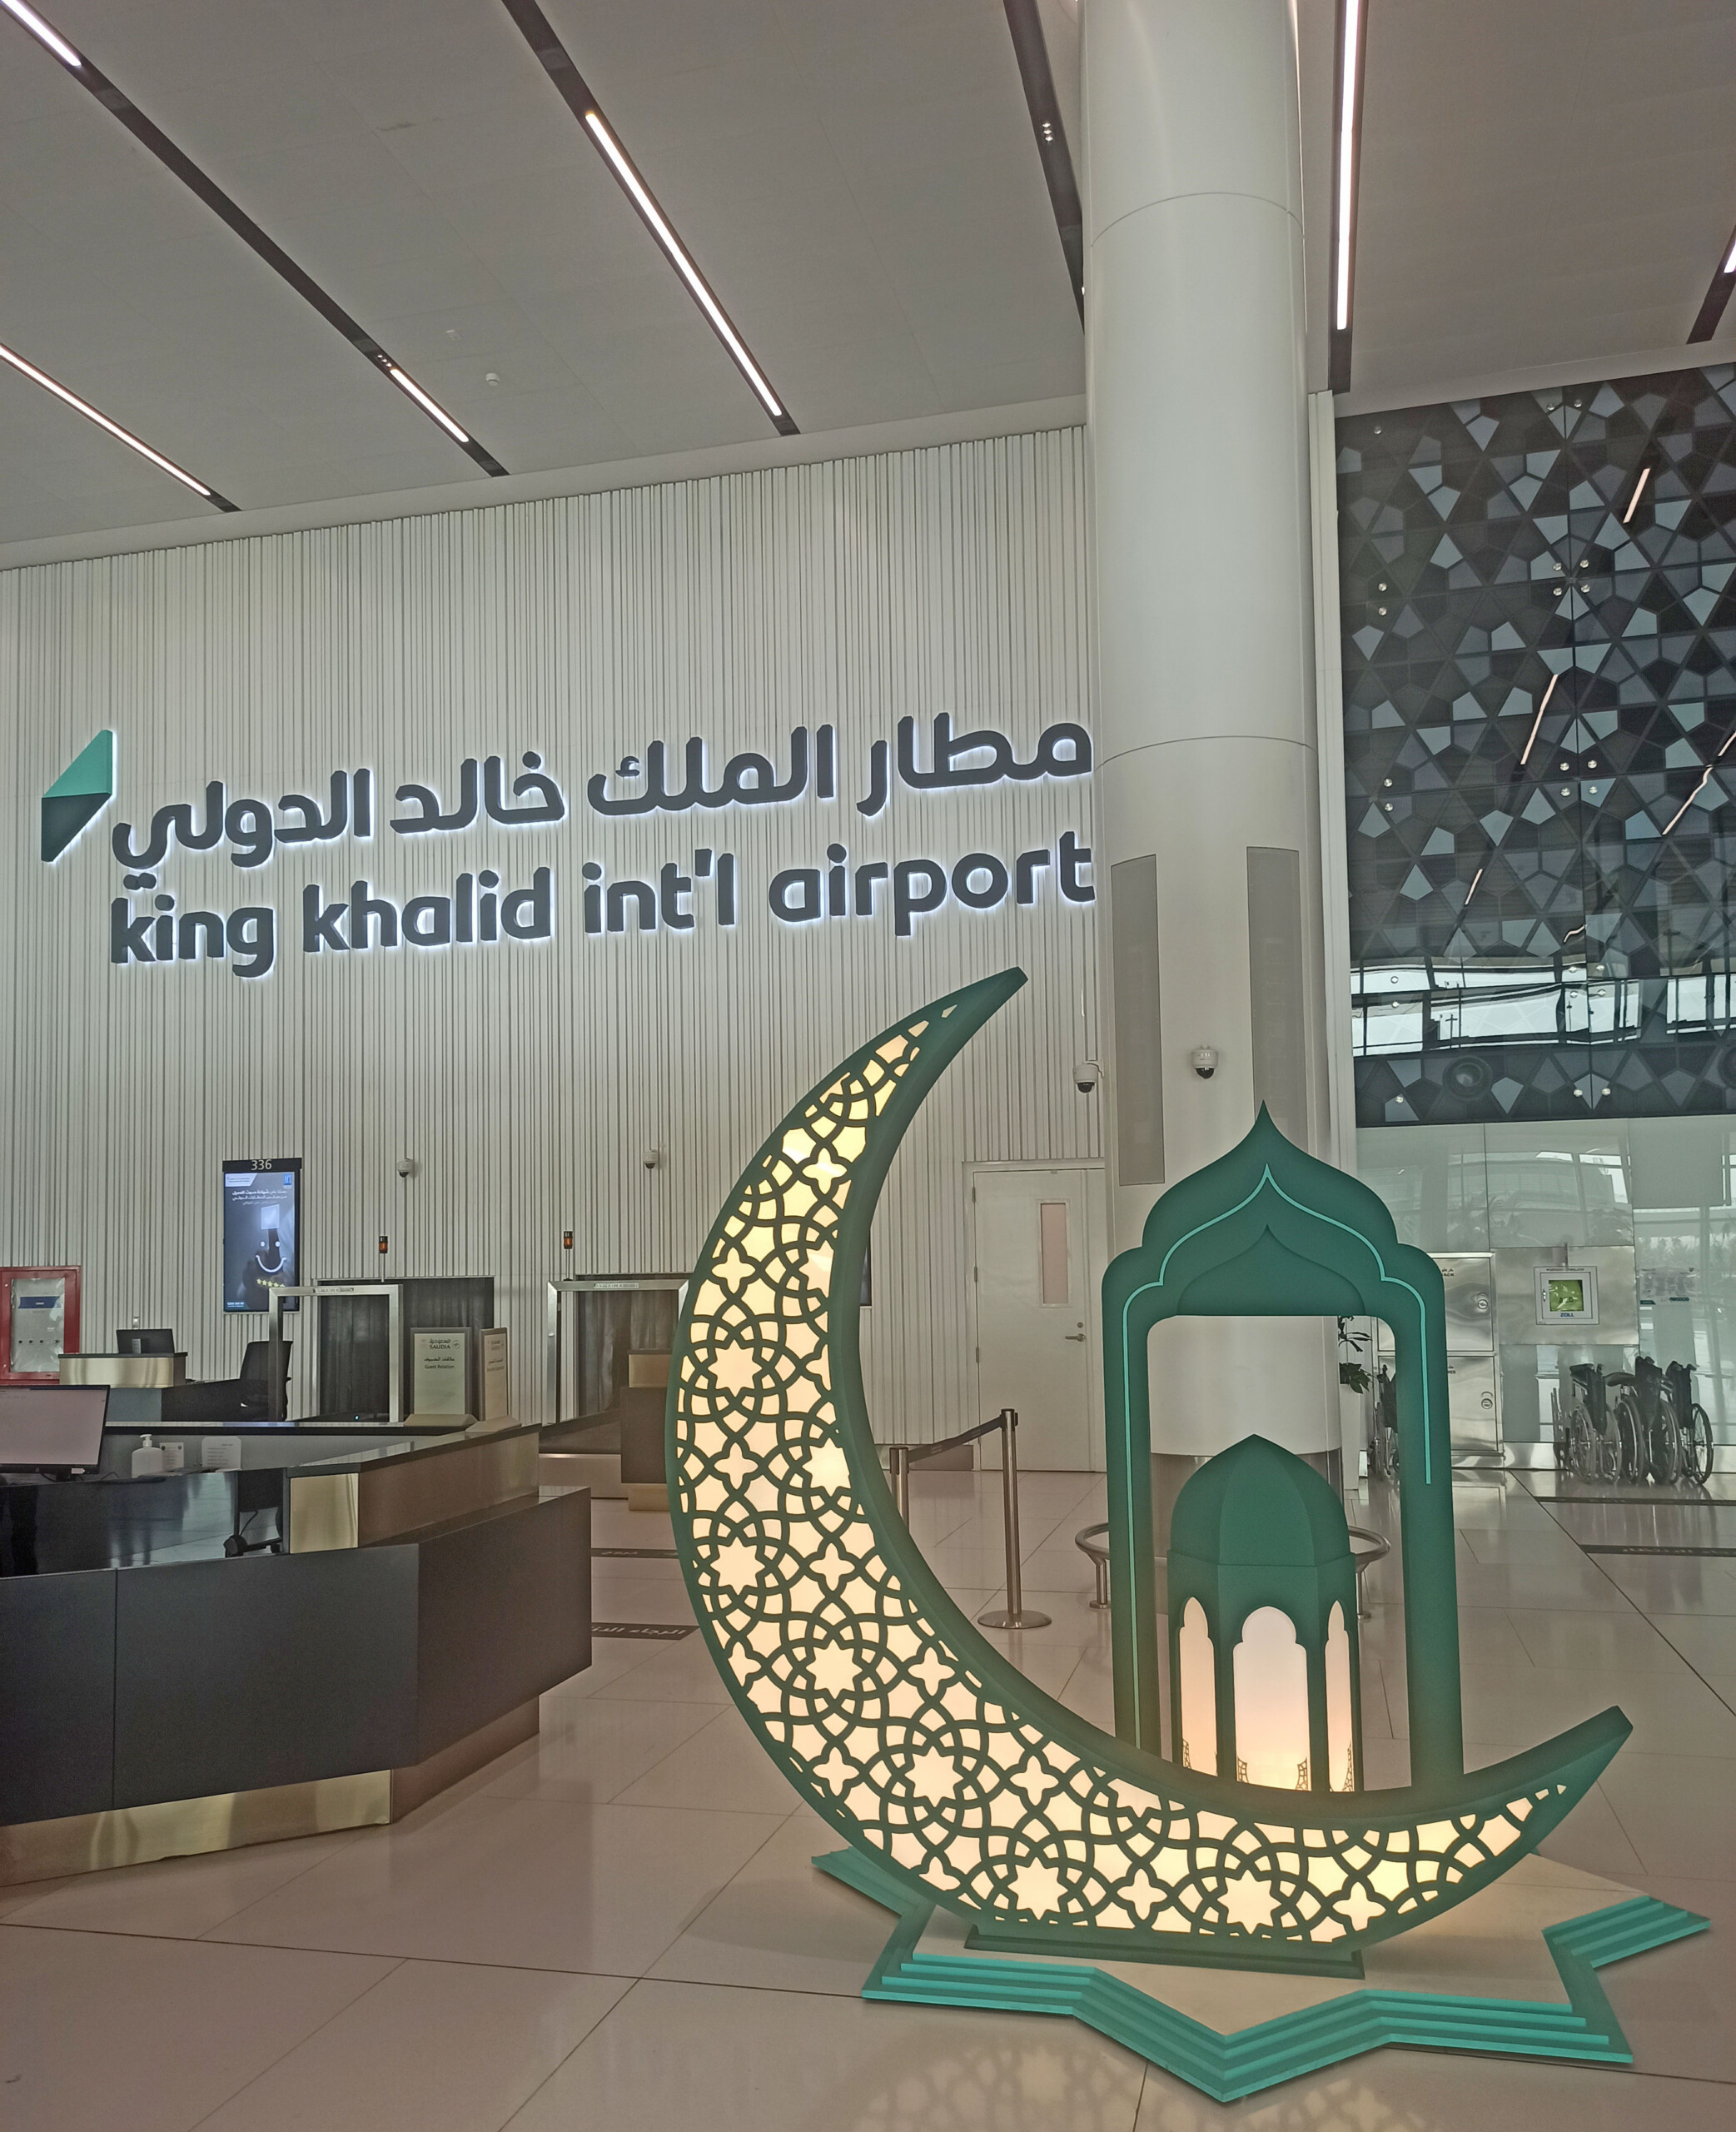 Welcome to King Khalid International Airport